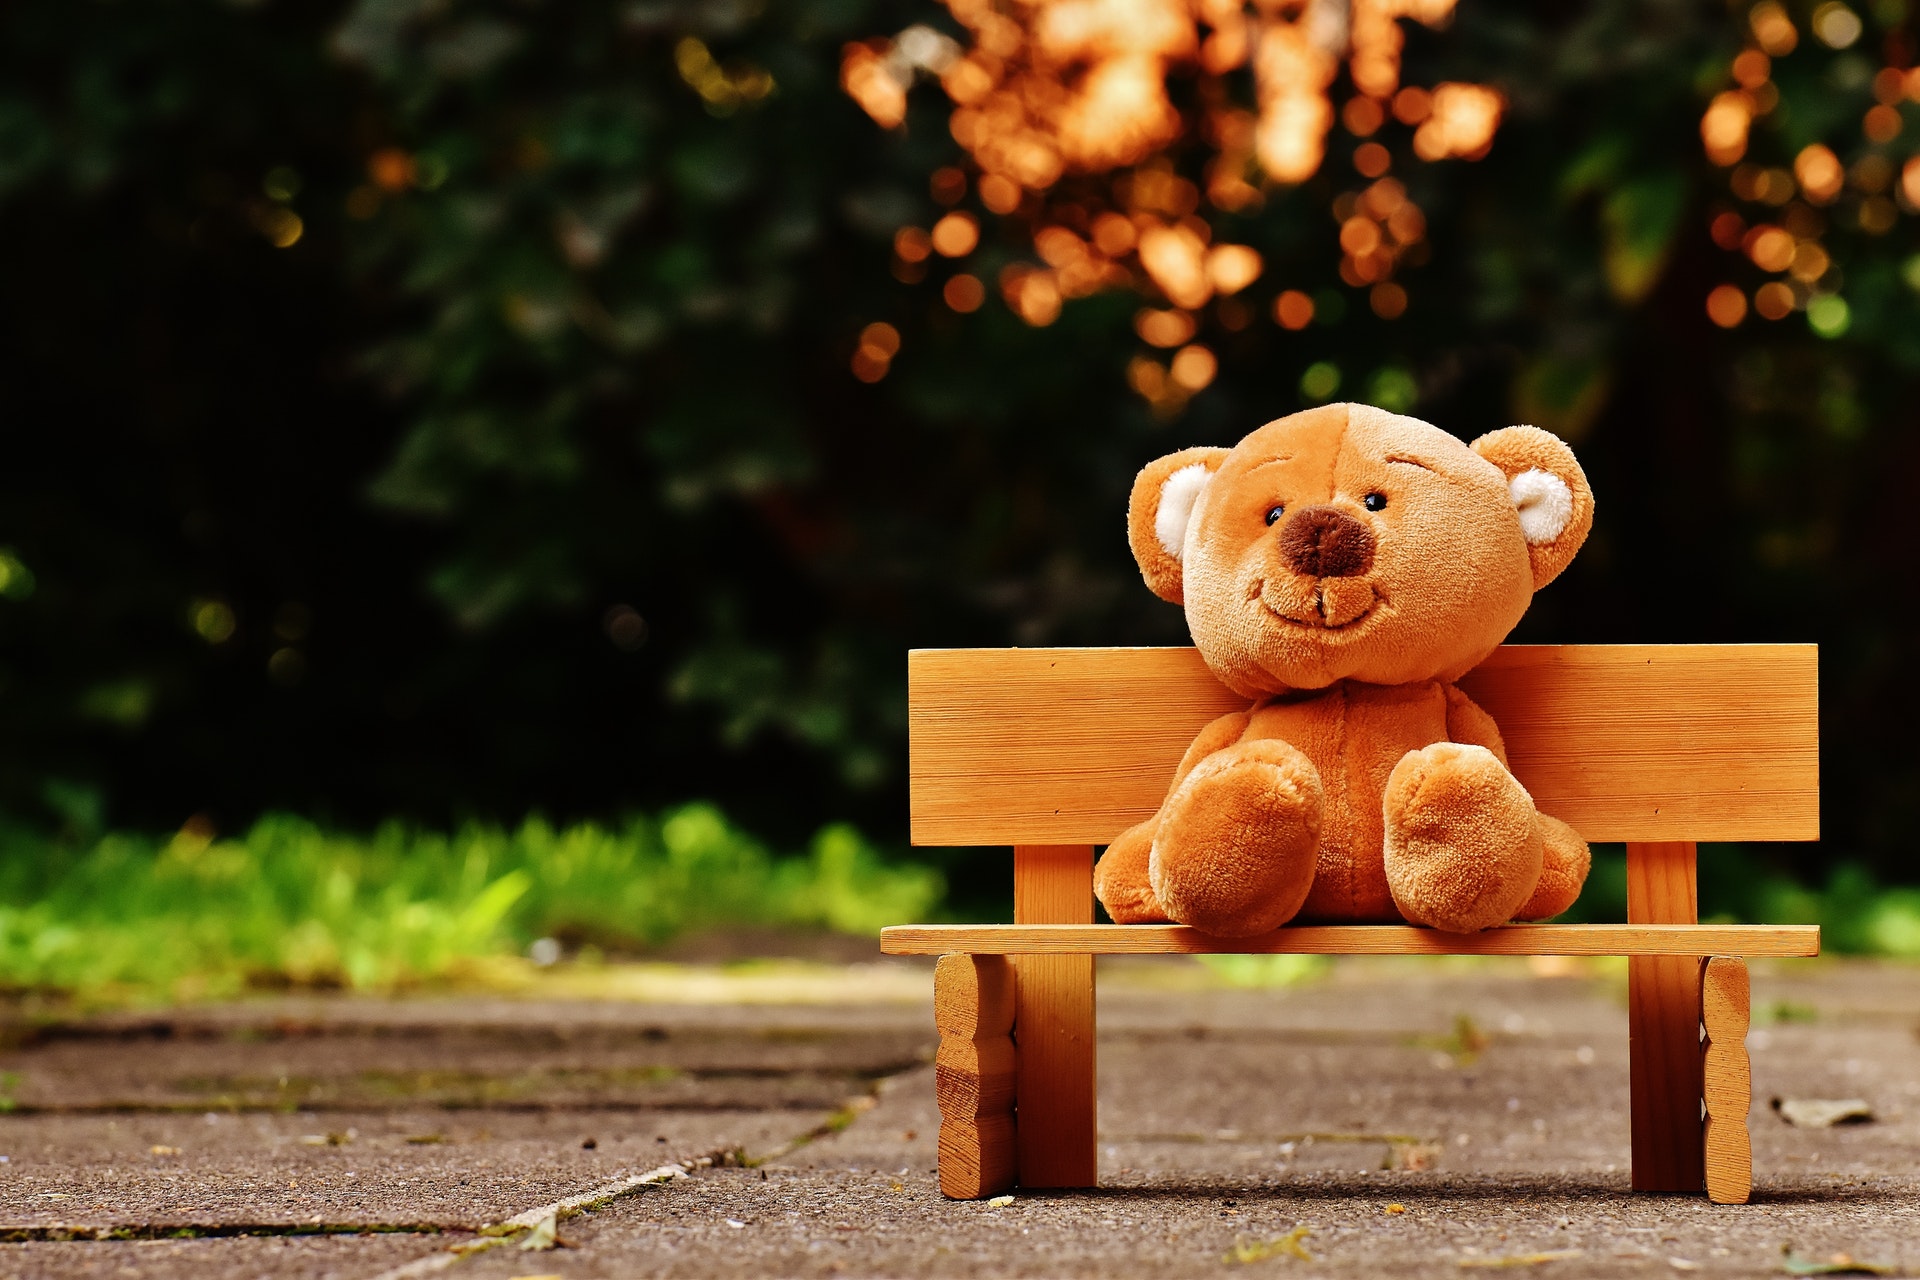 What are Common Child Injury Cases in Chicago?